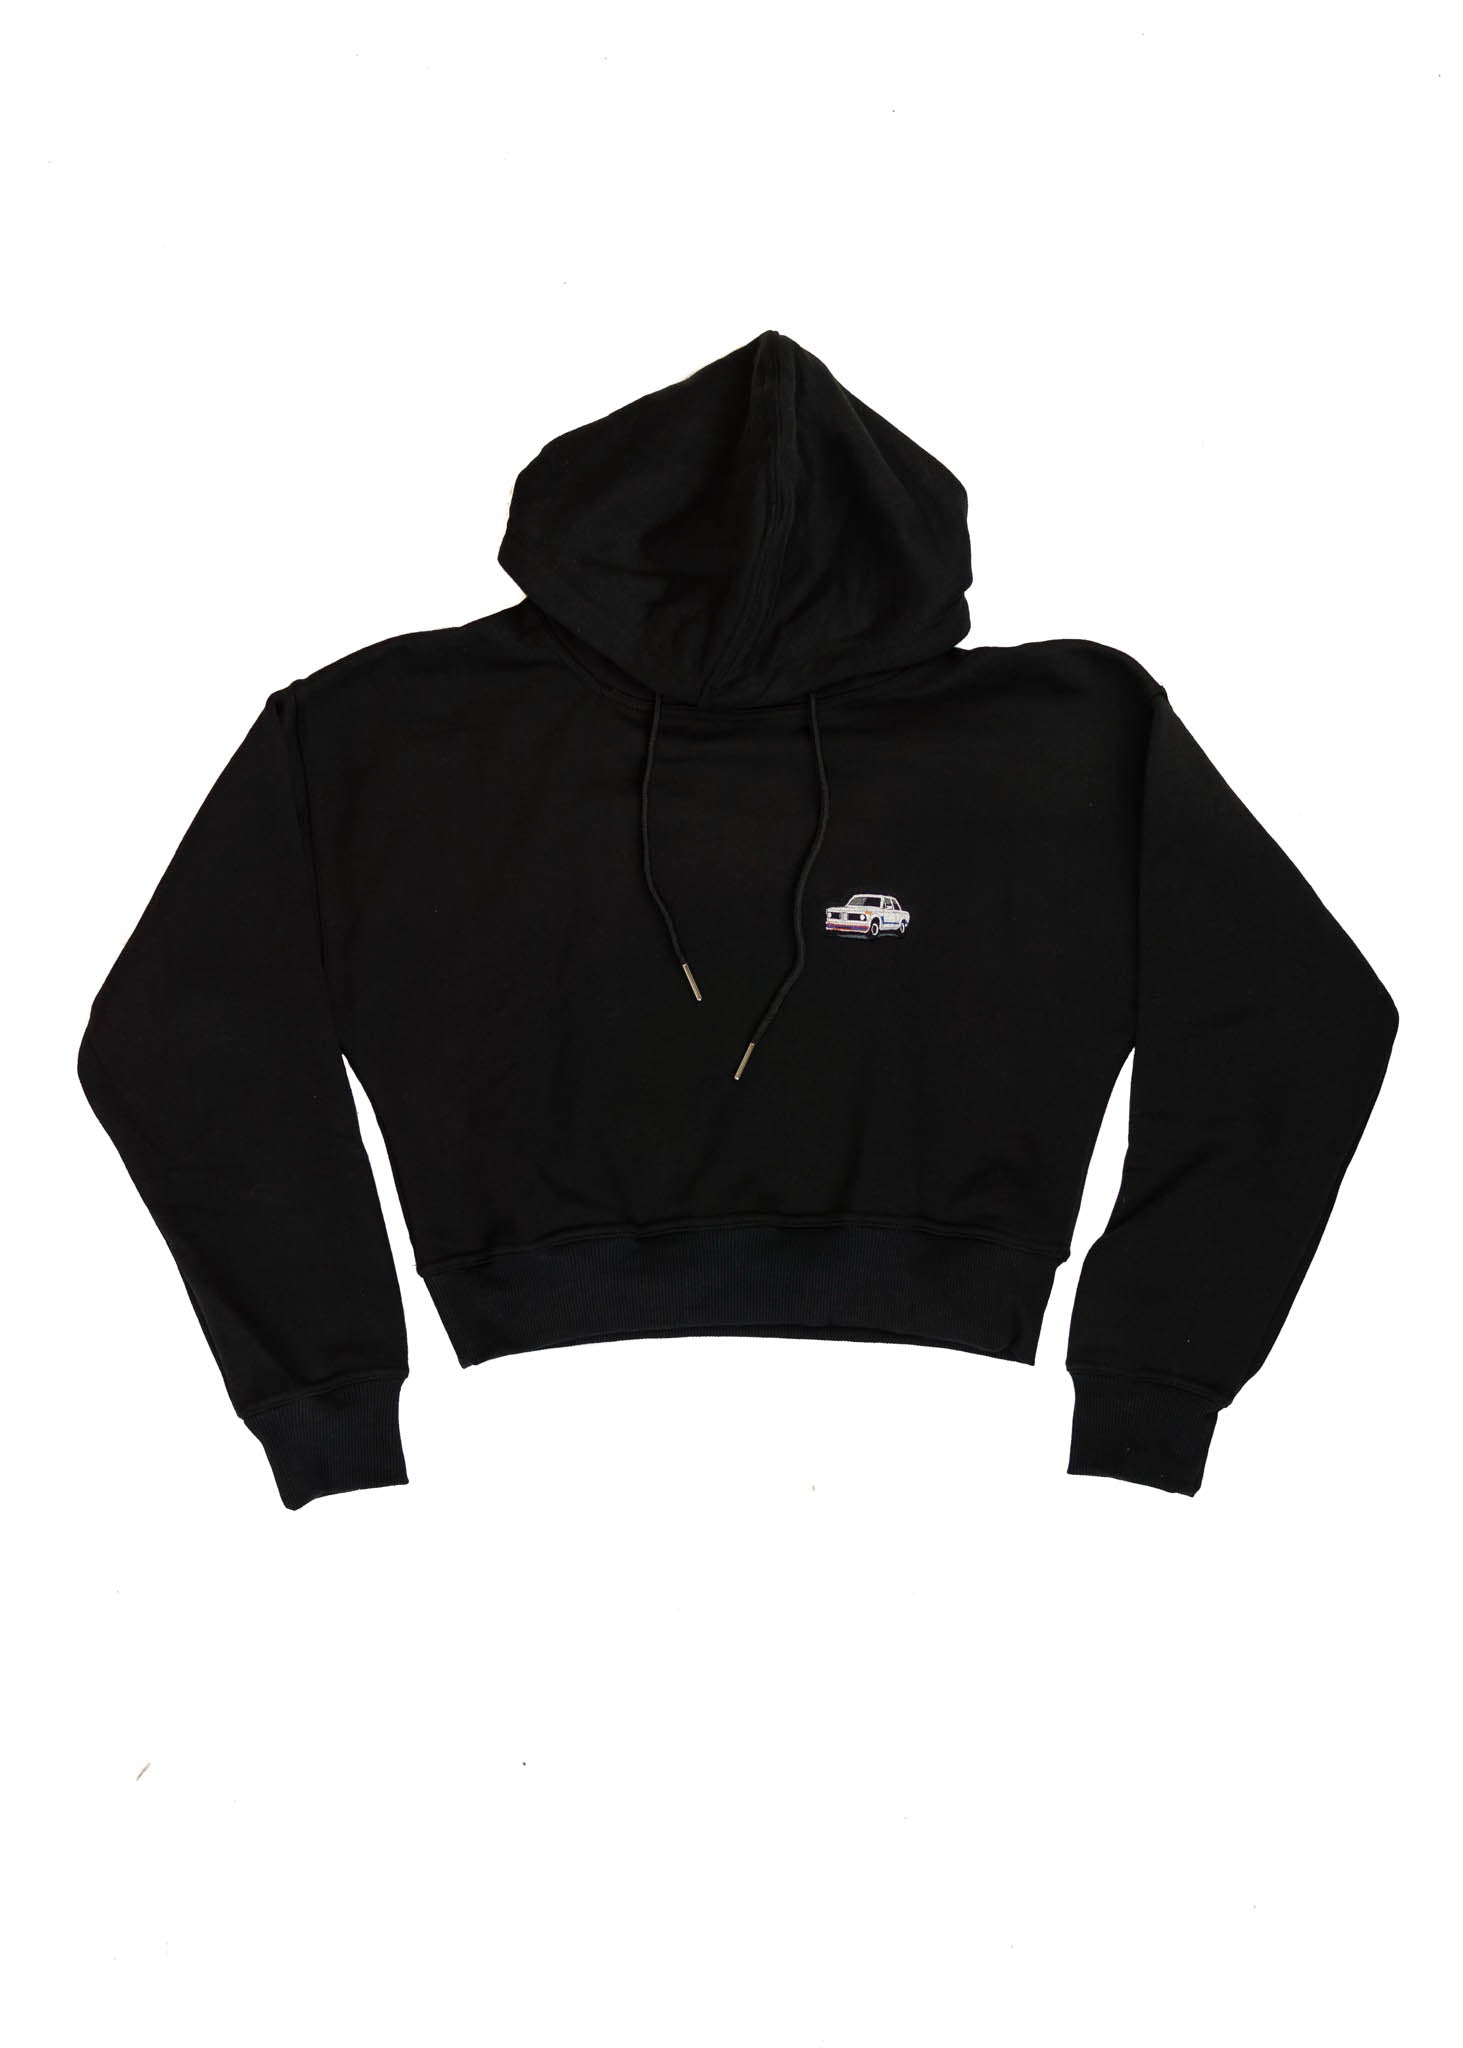 A black BMW cropped hoodie for women. Photo is a front view of the cropped sweater with an embroidered BMW 2002 Turbo. Fabric composition is 100% cotton. The material is soft, comfortable, breathable, and non-transparent. The style of this crop hoodie is long sleeve, crewneck with a hood, hooded, with embroidery on the chest.